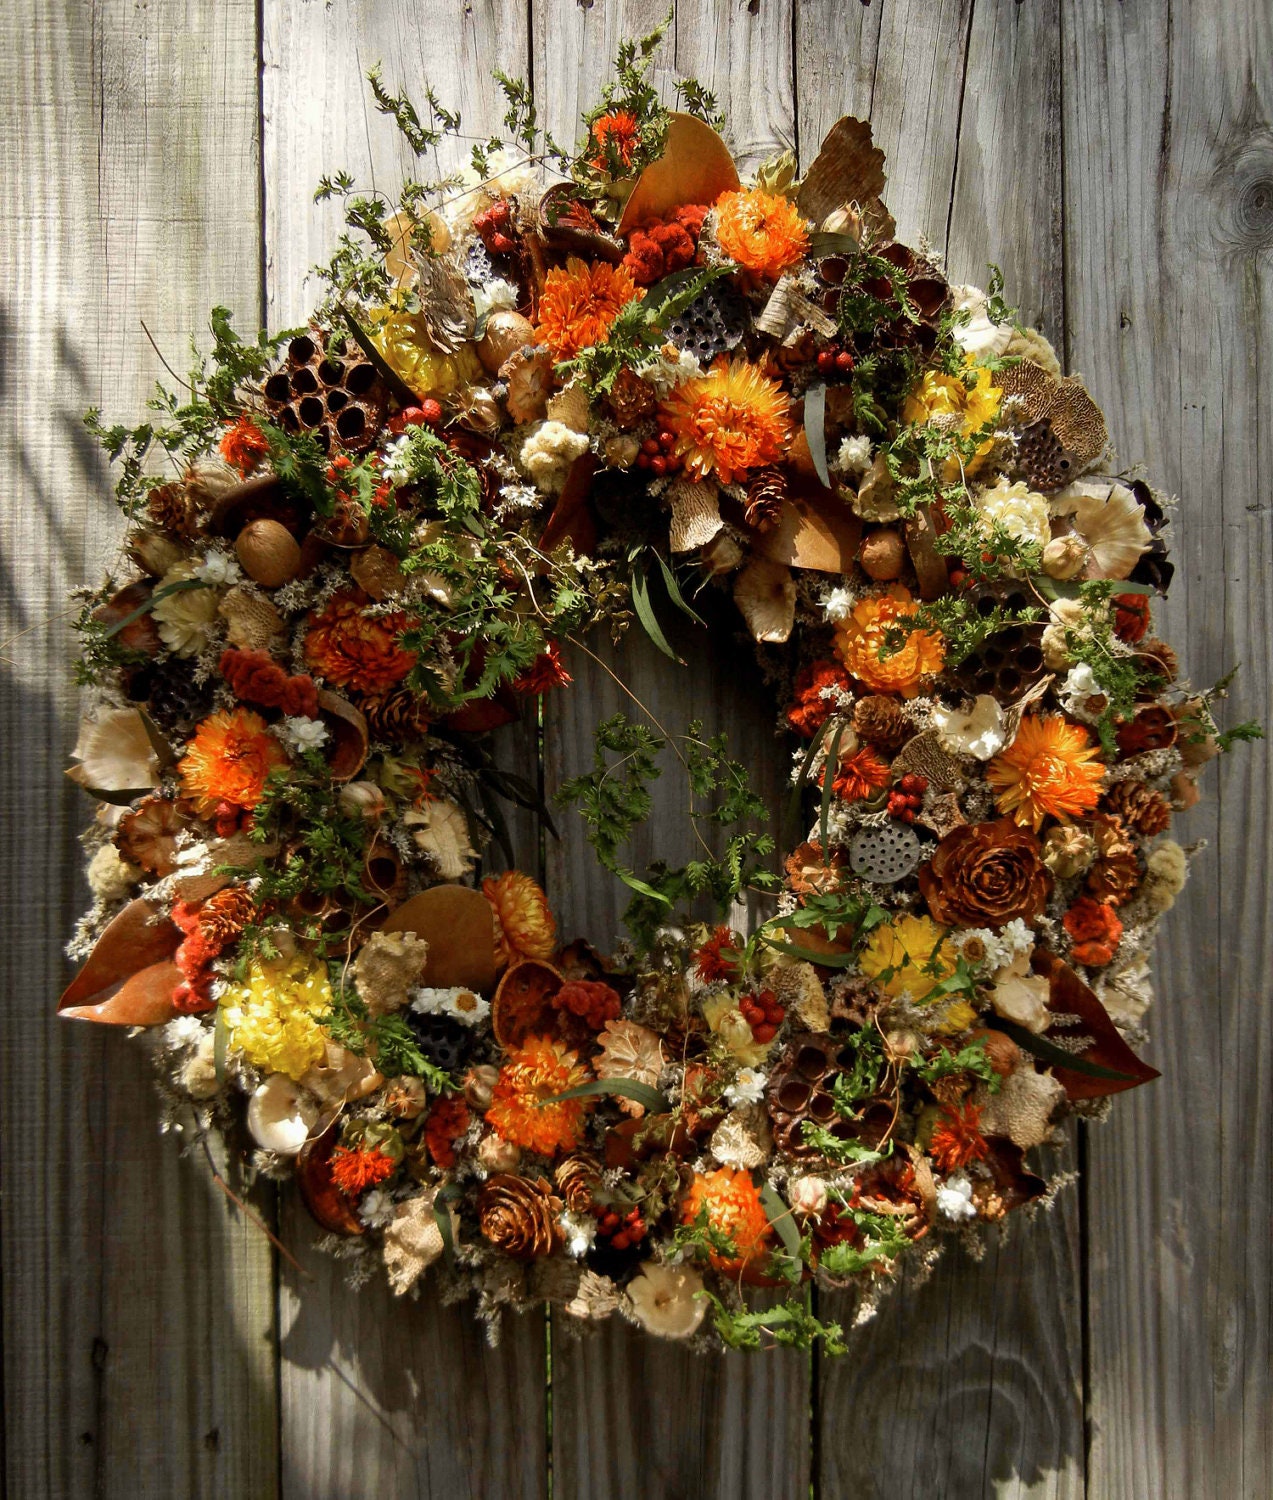 Natural Woodland Wreath | forevermore1 | Pinterest Picks - Fall Wreaths